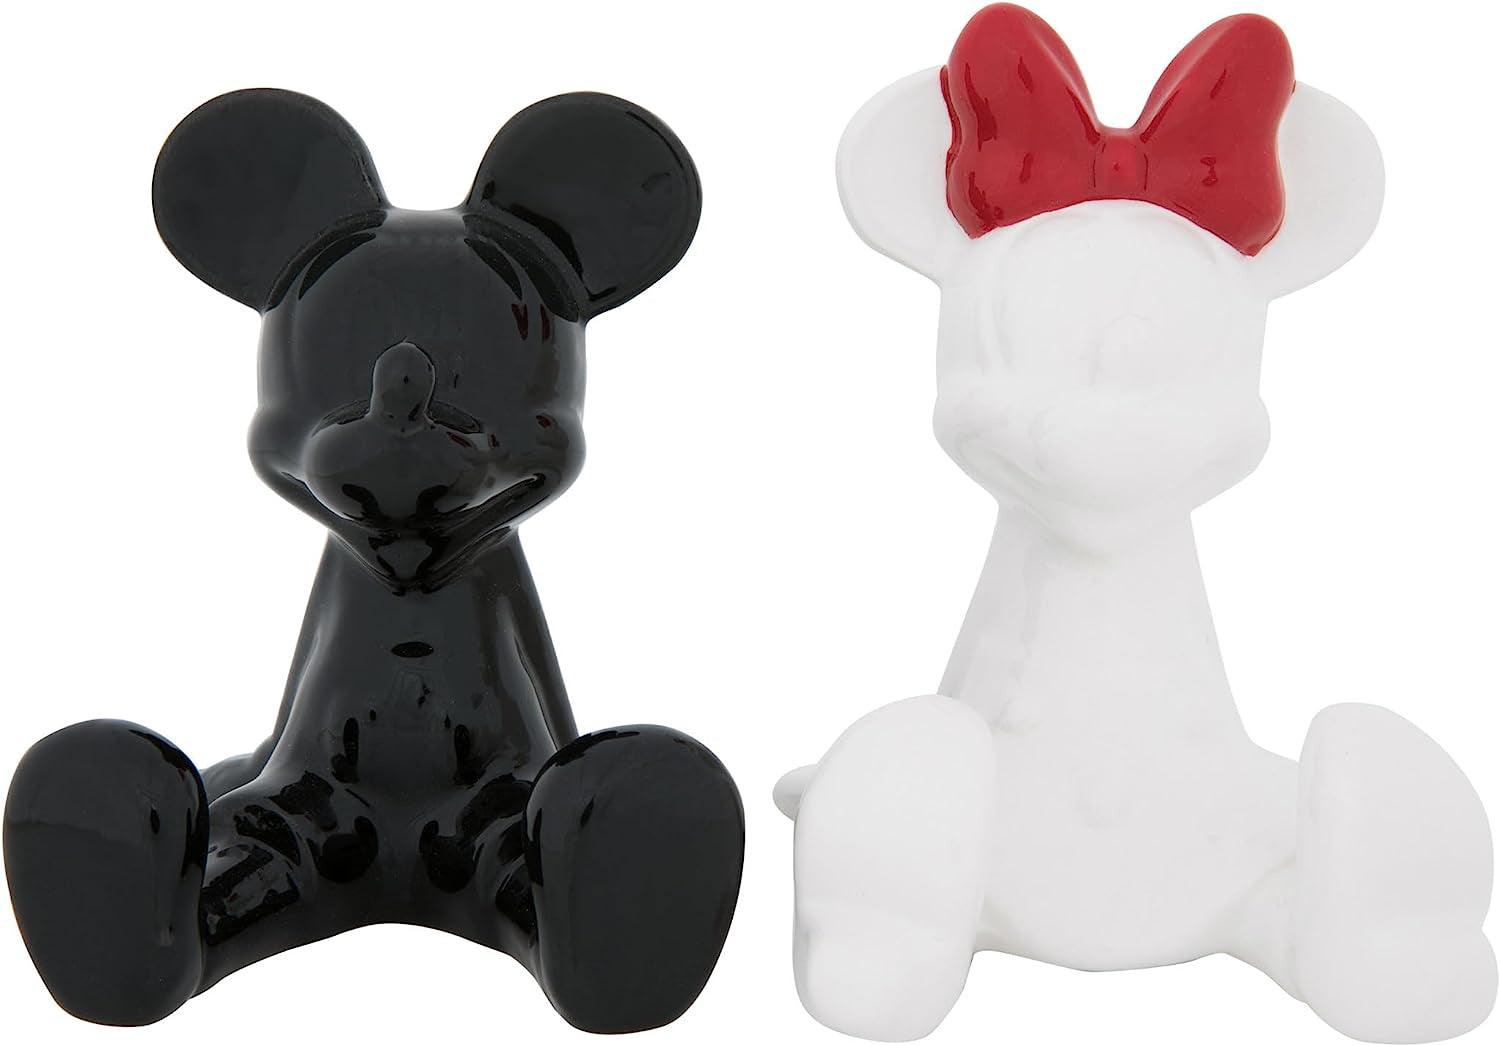 Mickey and Minnie Mouse Sitting Salt & Pepper Shakers